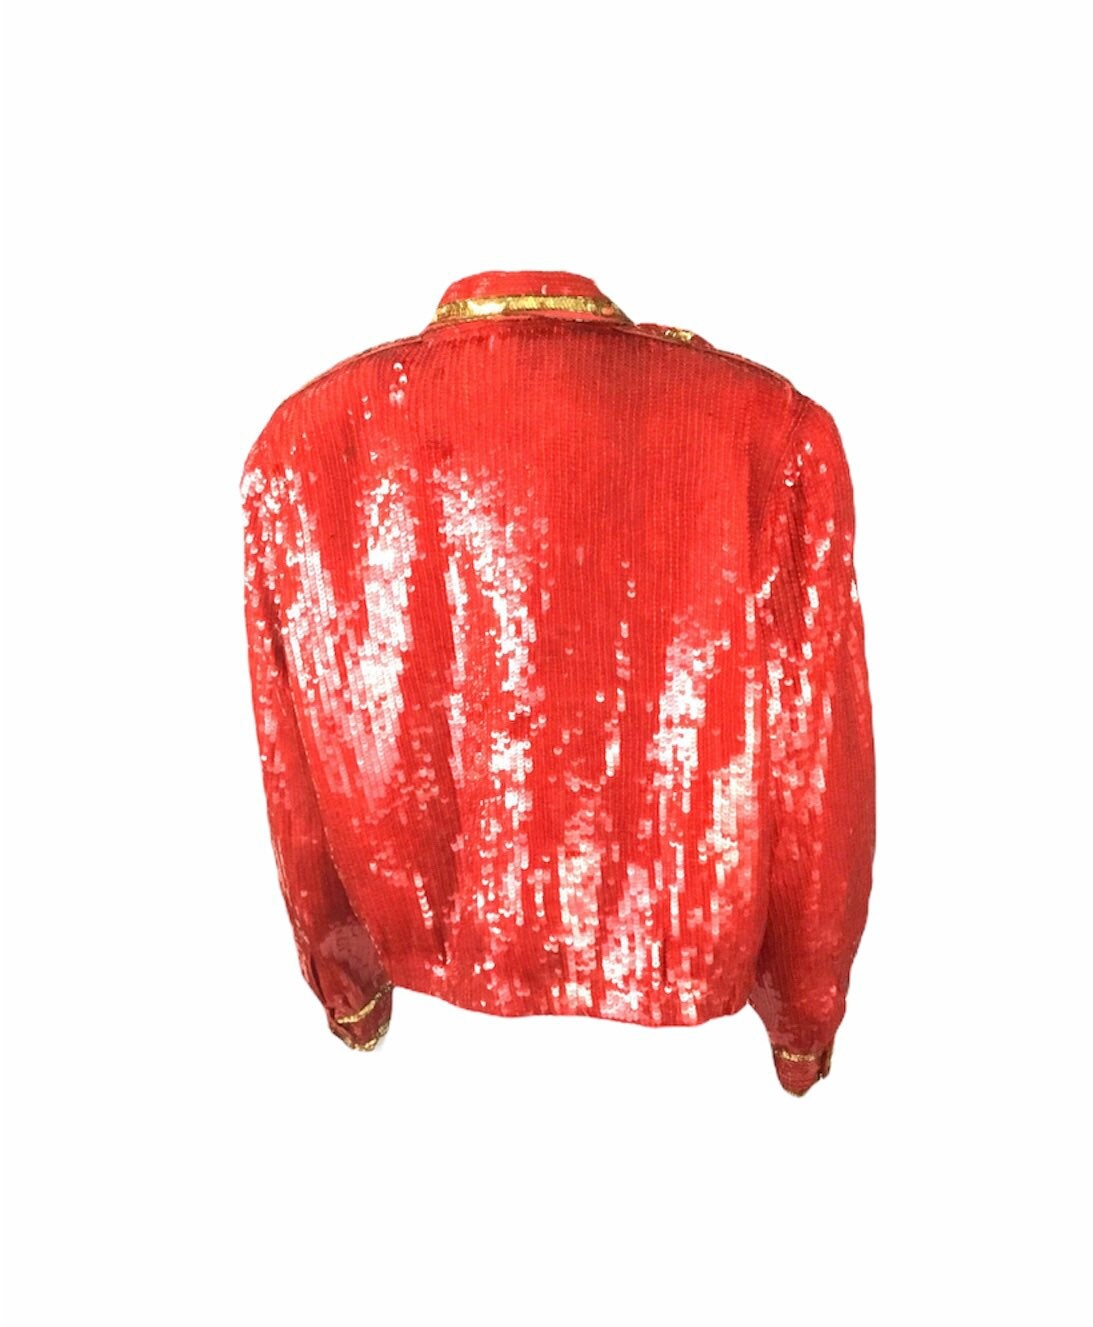 RARE Miltary Red Beaded Sequin Style Deco Jacket Sz L / XL